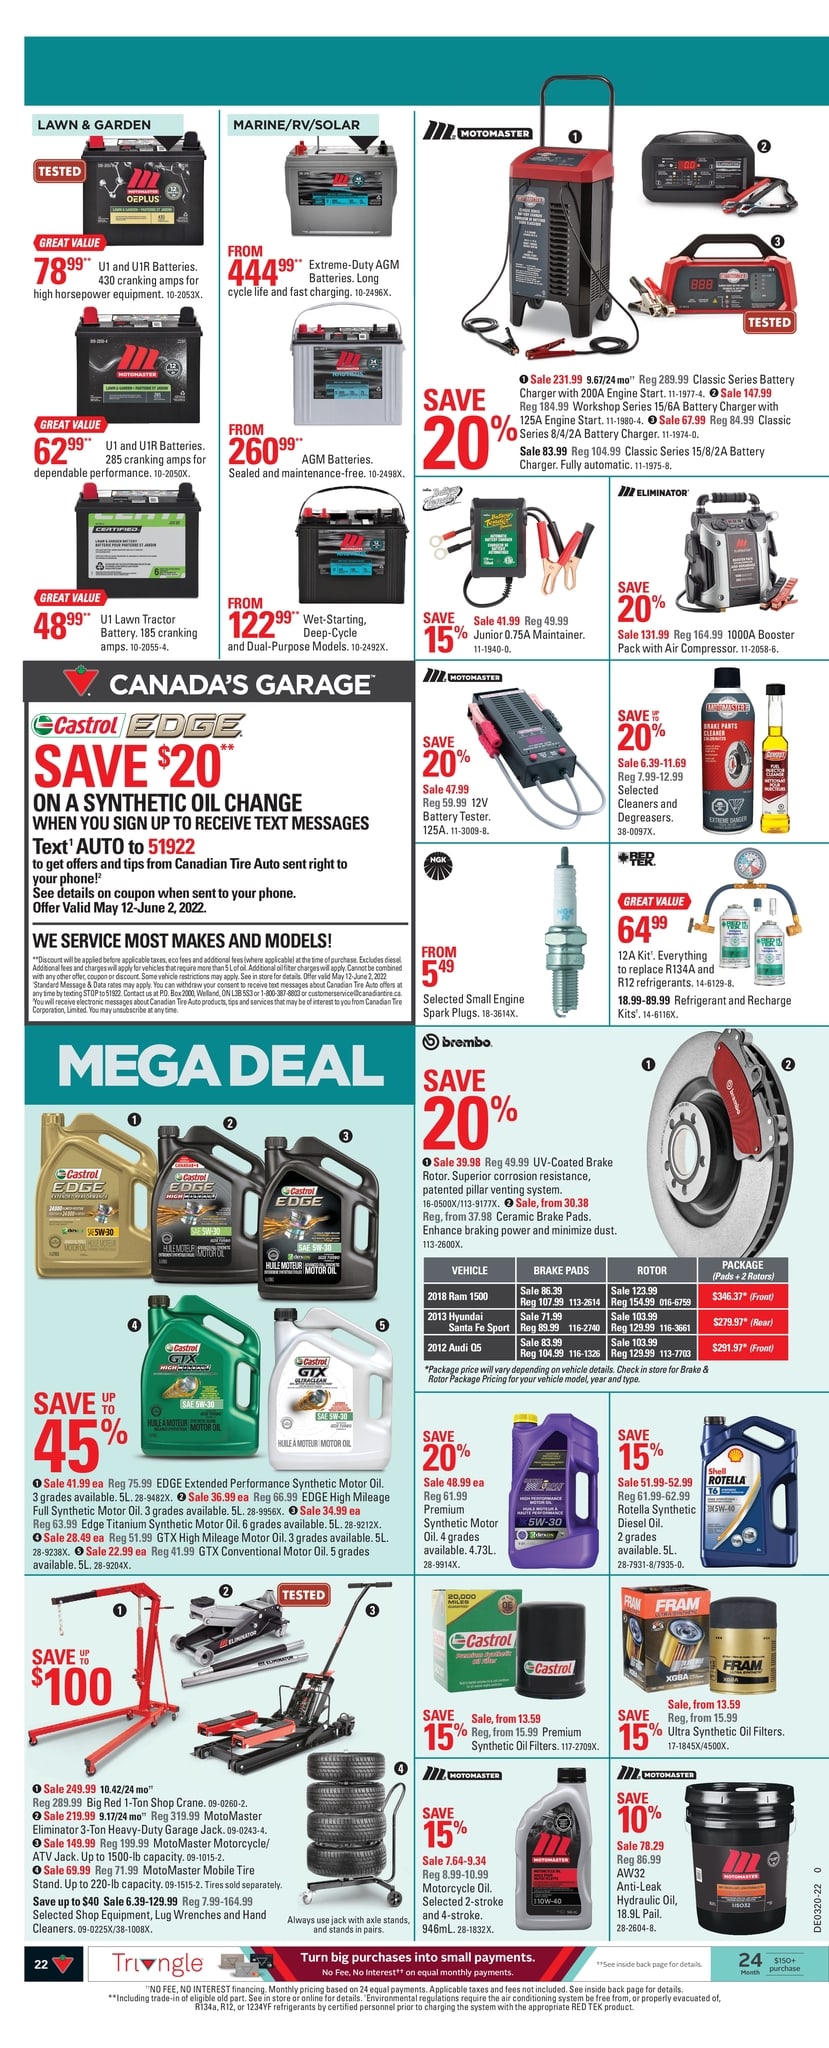 Canadian Tire - Weekly Flyer Specials - Page 22